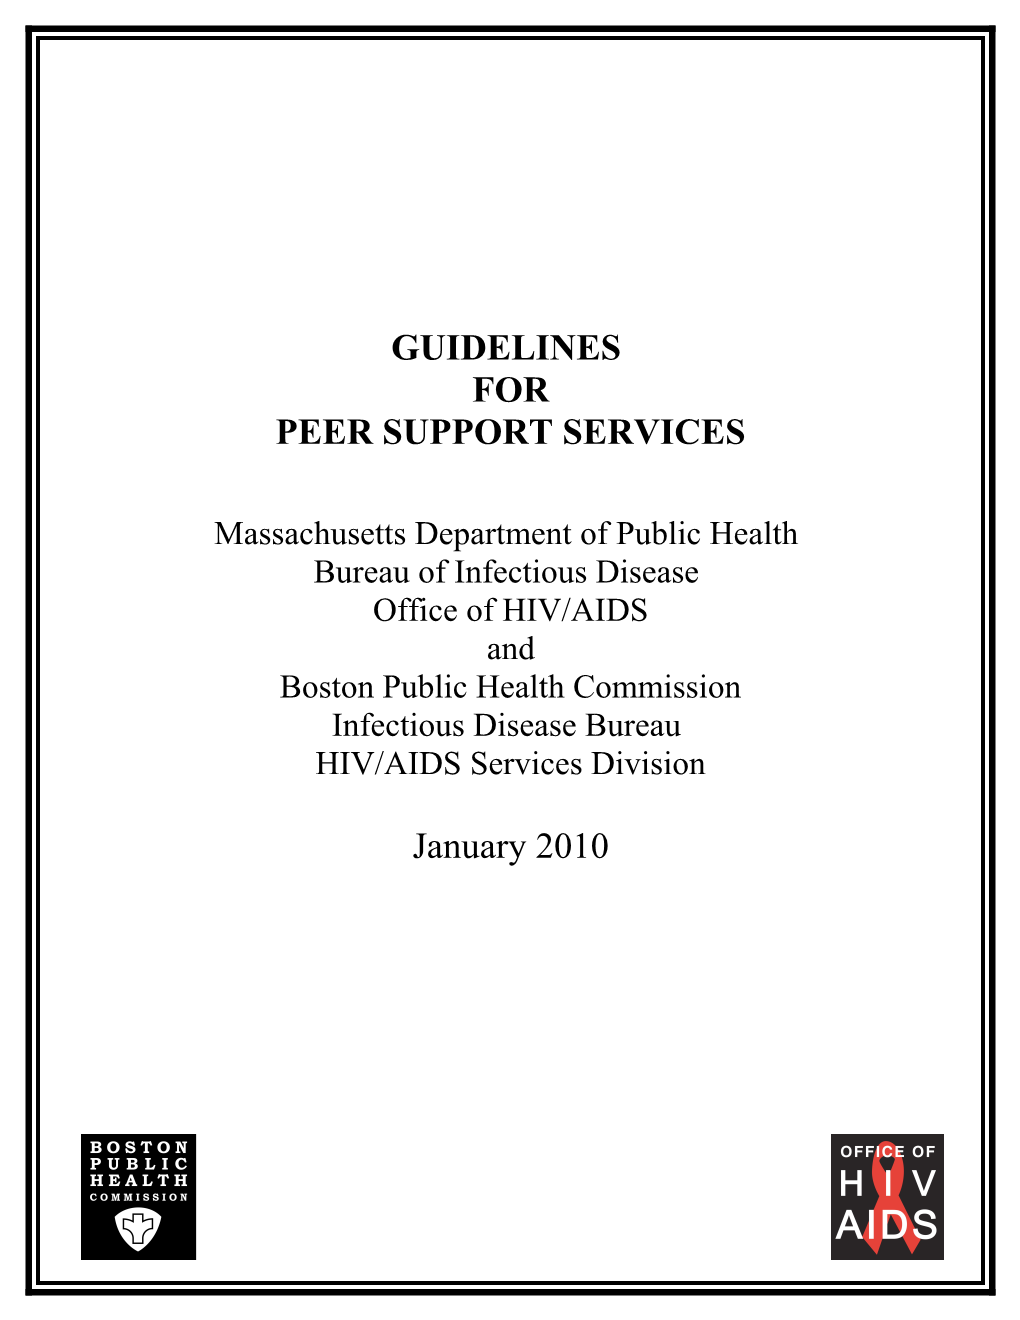 Peer Support Guidelines January 2010